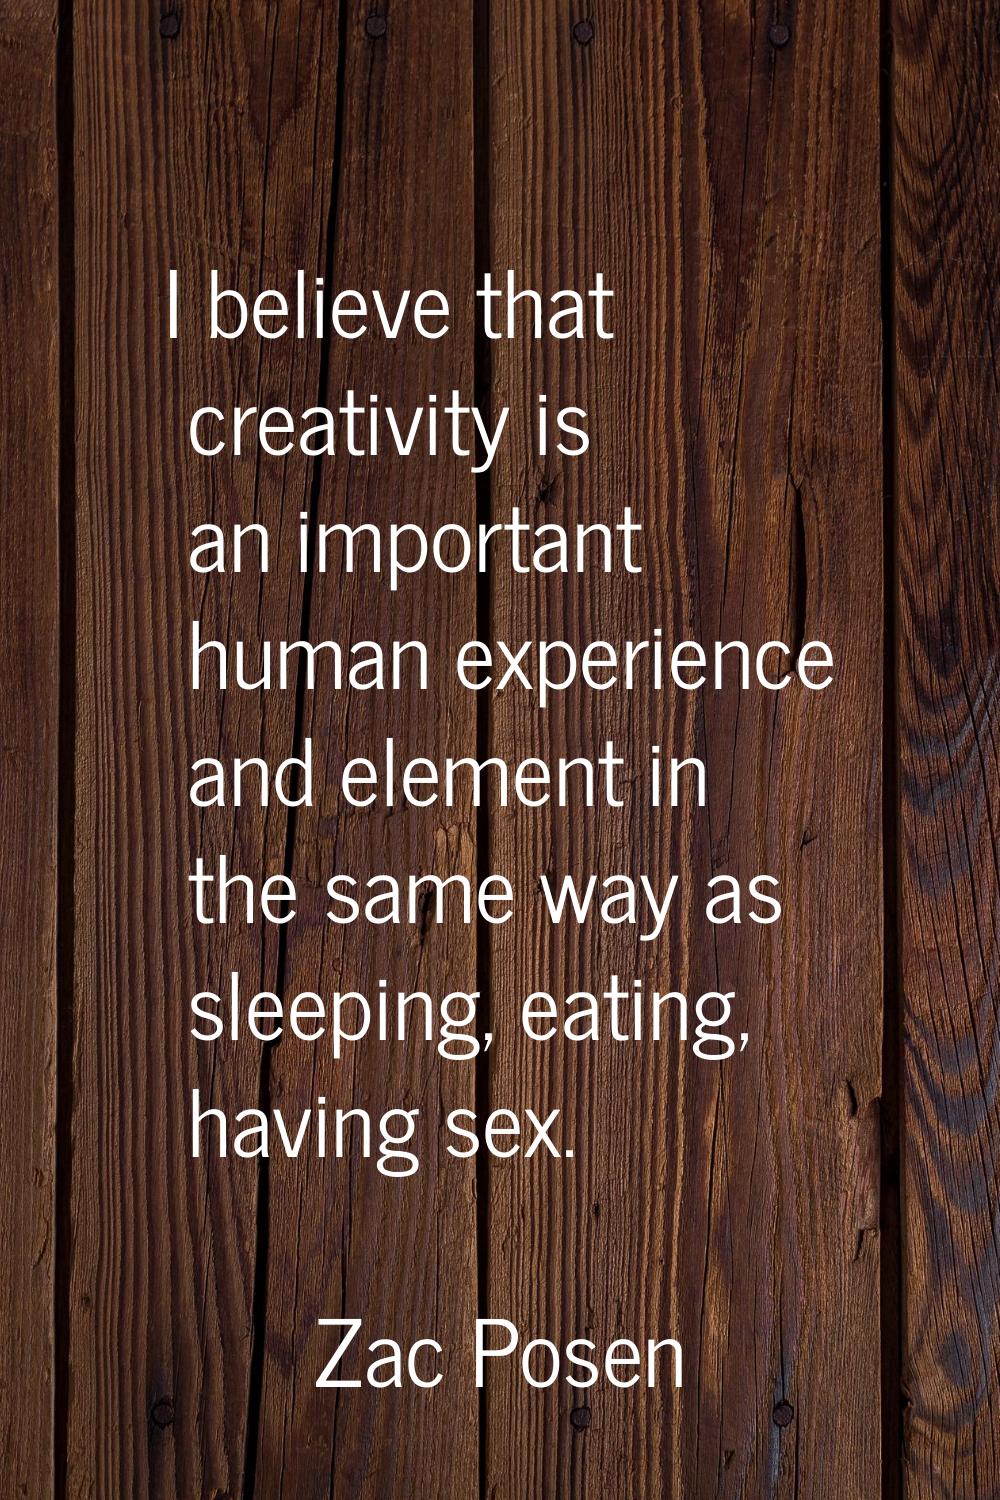 I believe that creativity is an important human experience and element in the same way as sleeping,